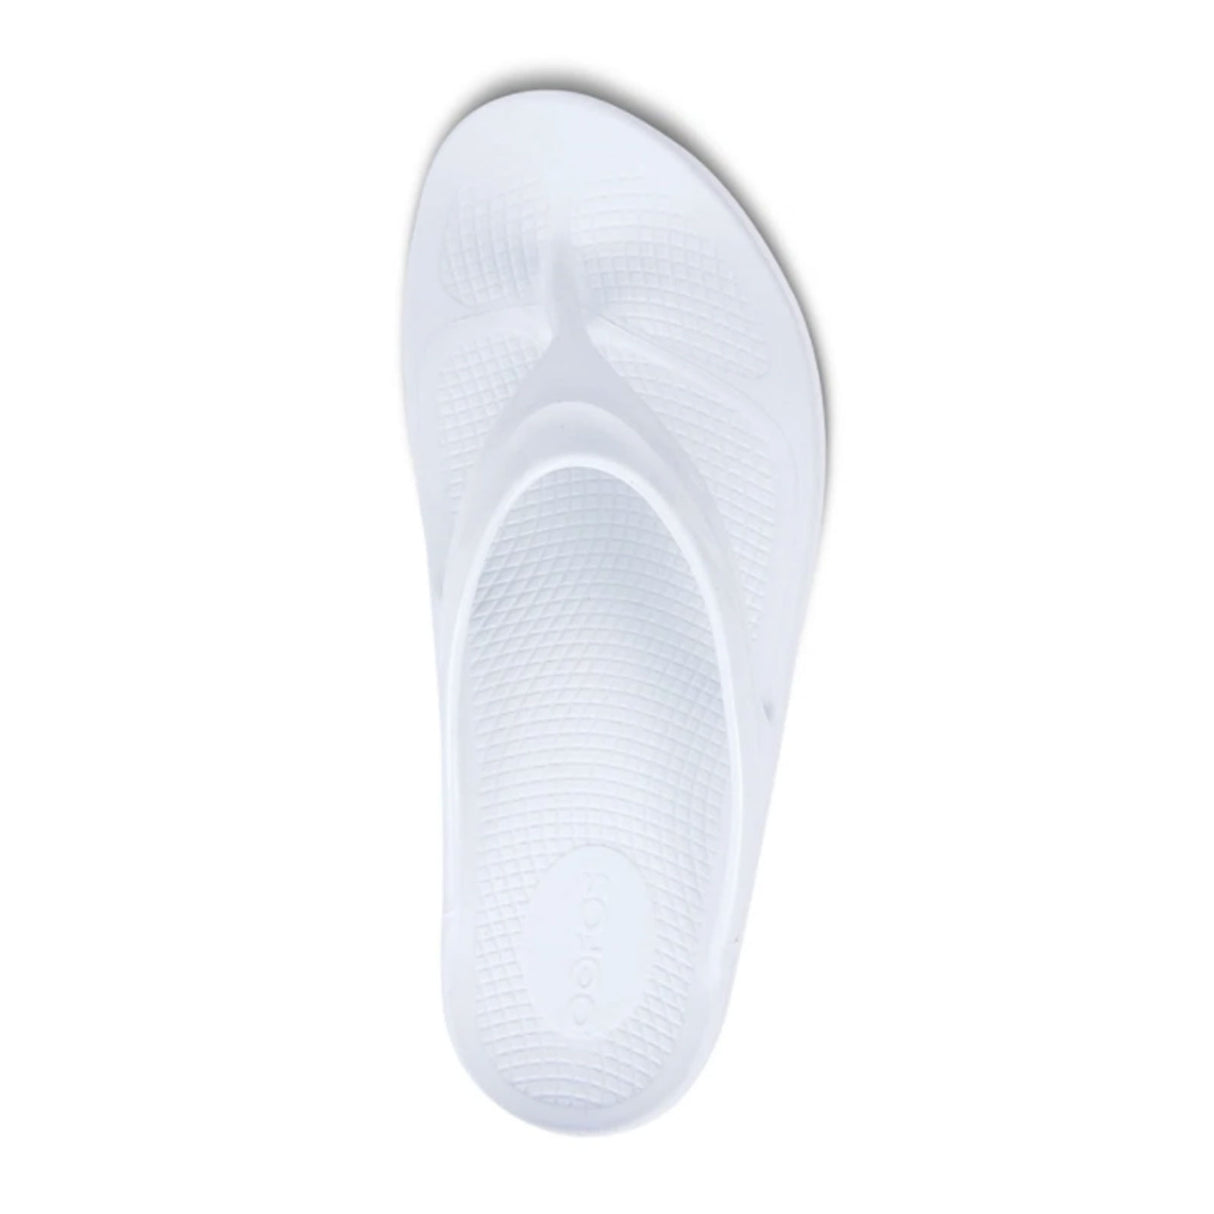 Oofos OOlala Sandal (Women) - White Sandals - Thong - The Heel Shoe Fitters